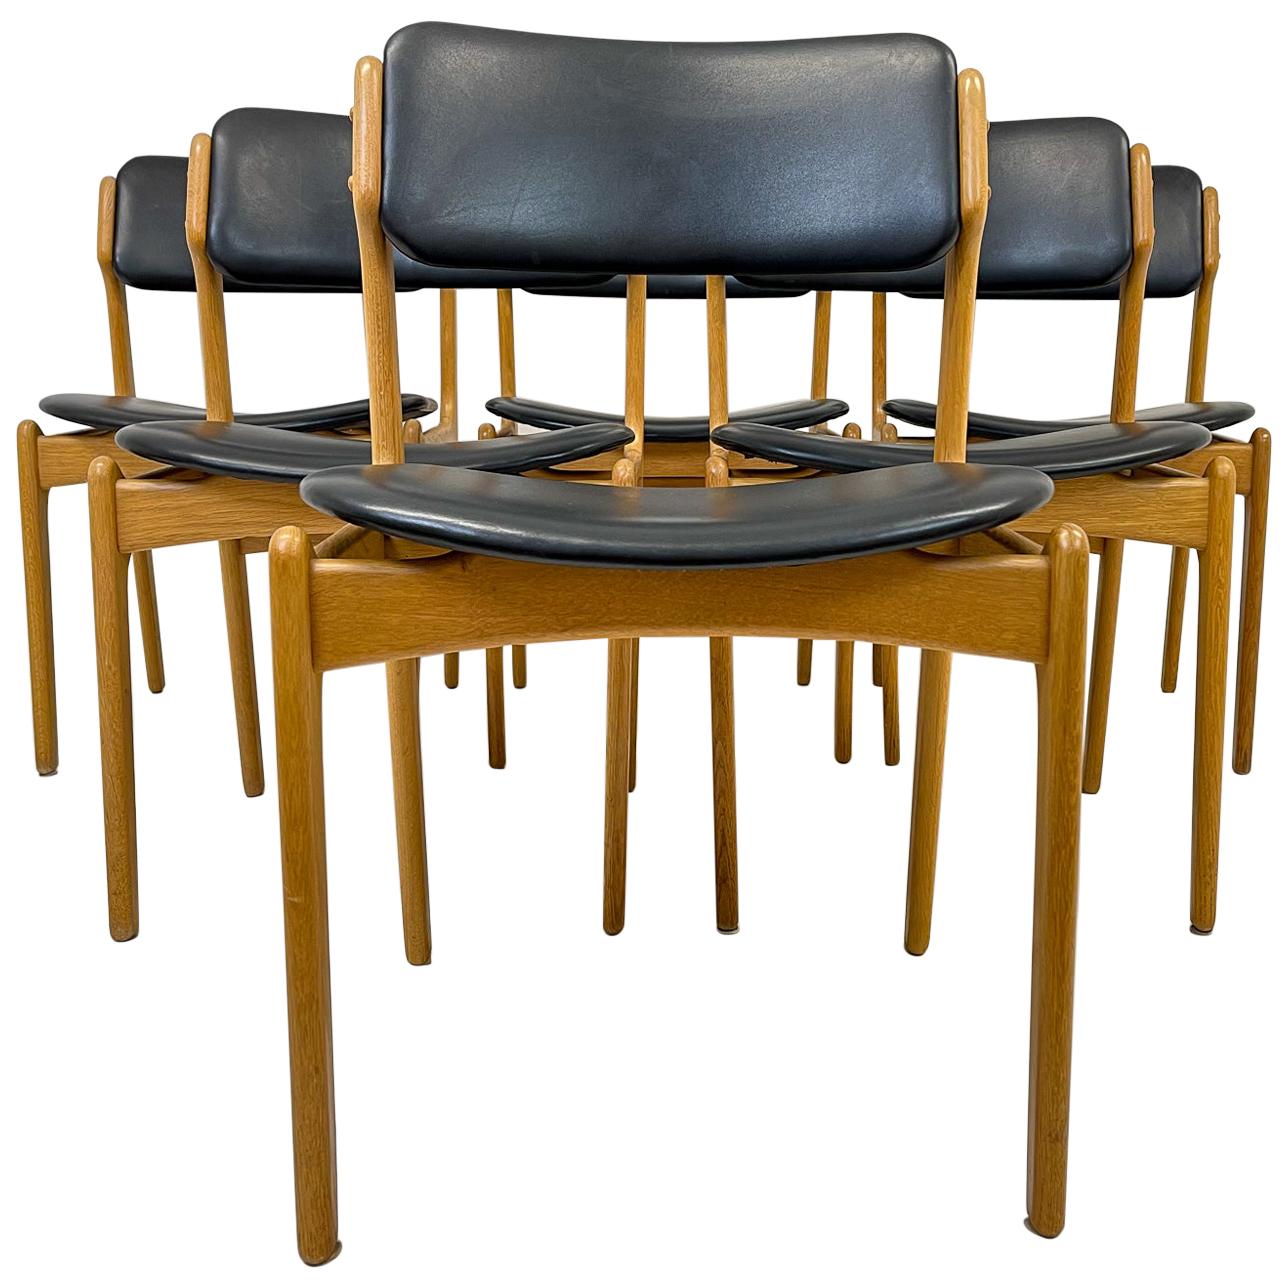 These 6 dining chairs was produced in Denmark in the 1960 and designed by Erik Buch. 
Nice dark leather with oak frame. 

Good vintage condition, some scratches to the leather and small wear on the oak. 

Dimensions: H 79 cm x W 51 cm x D 52